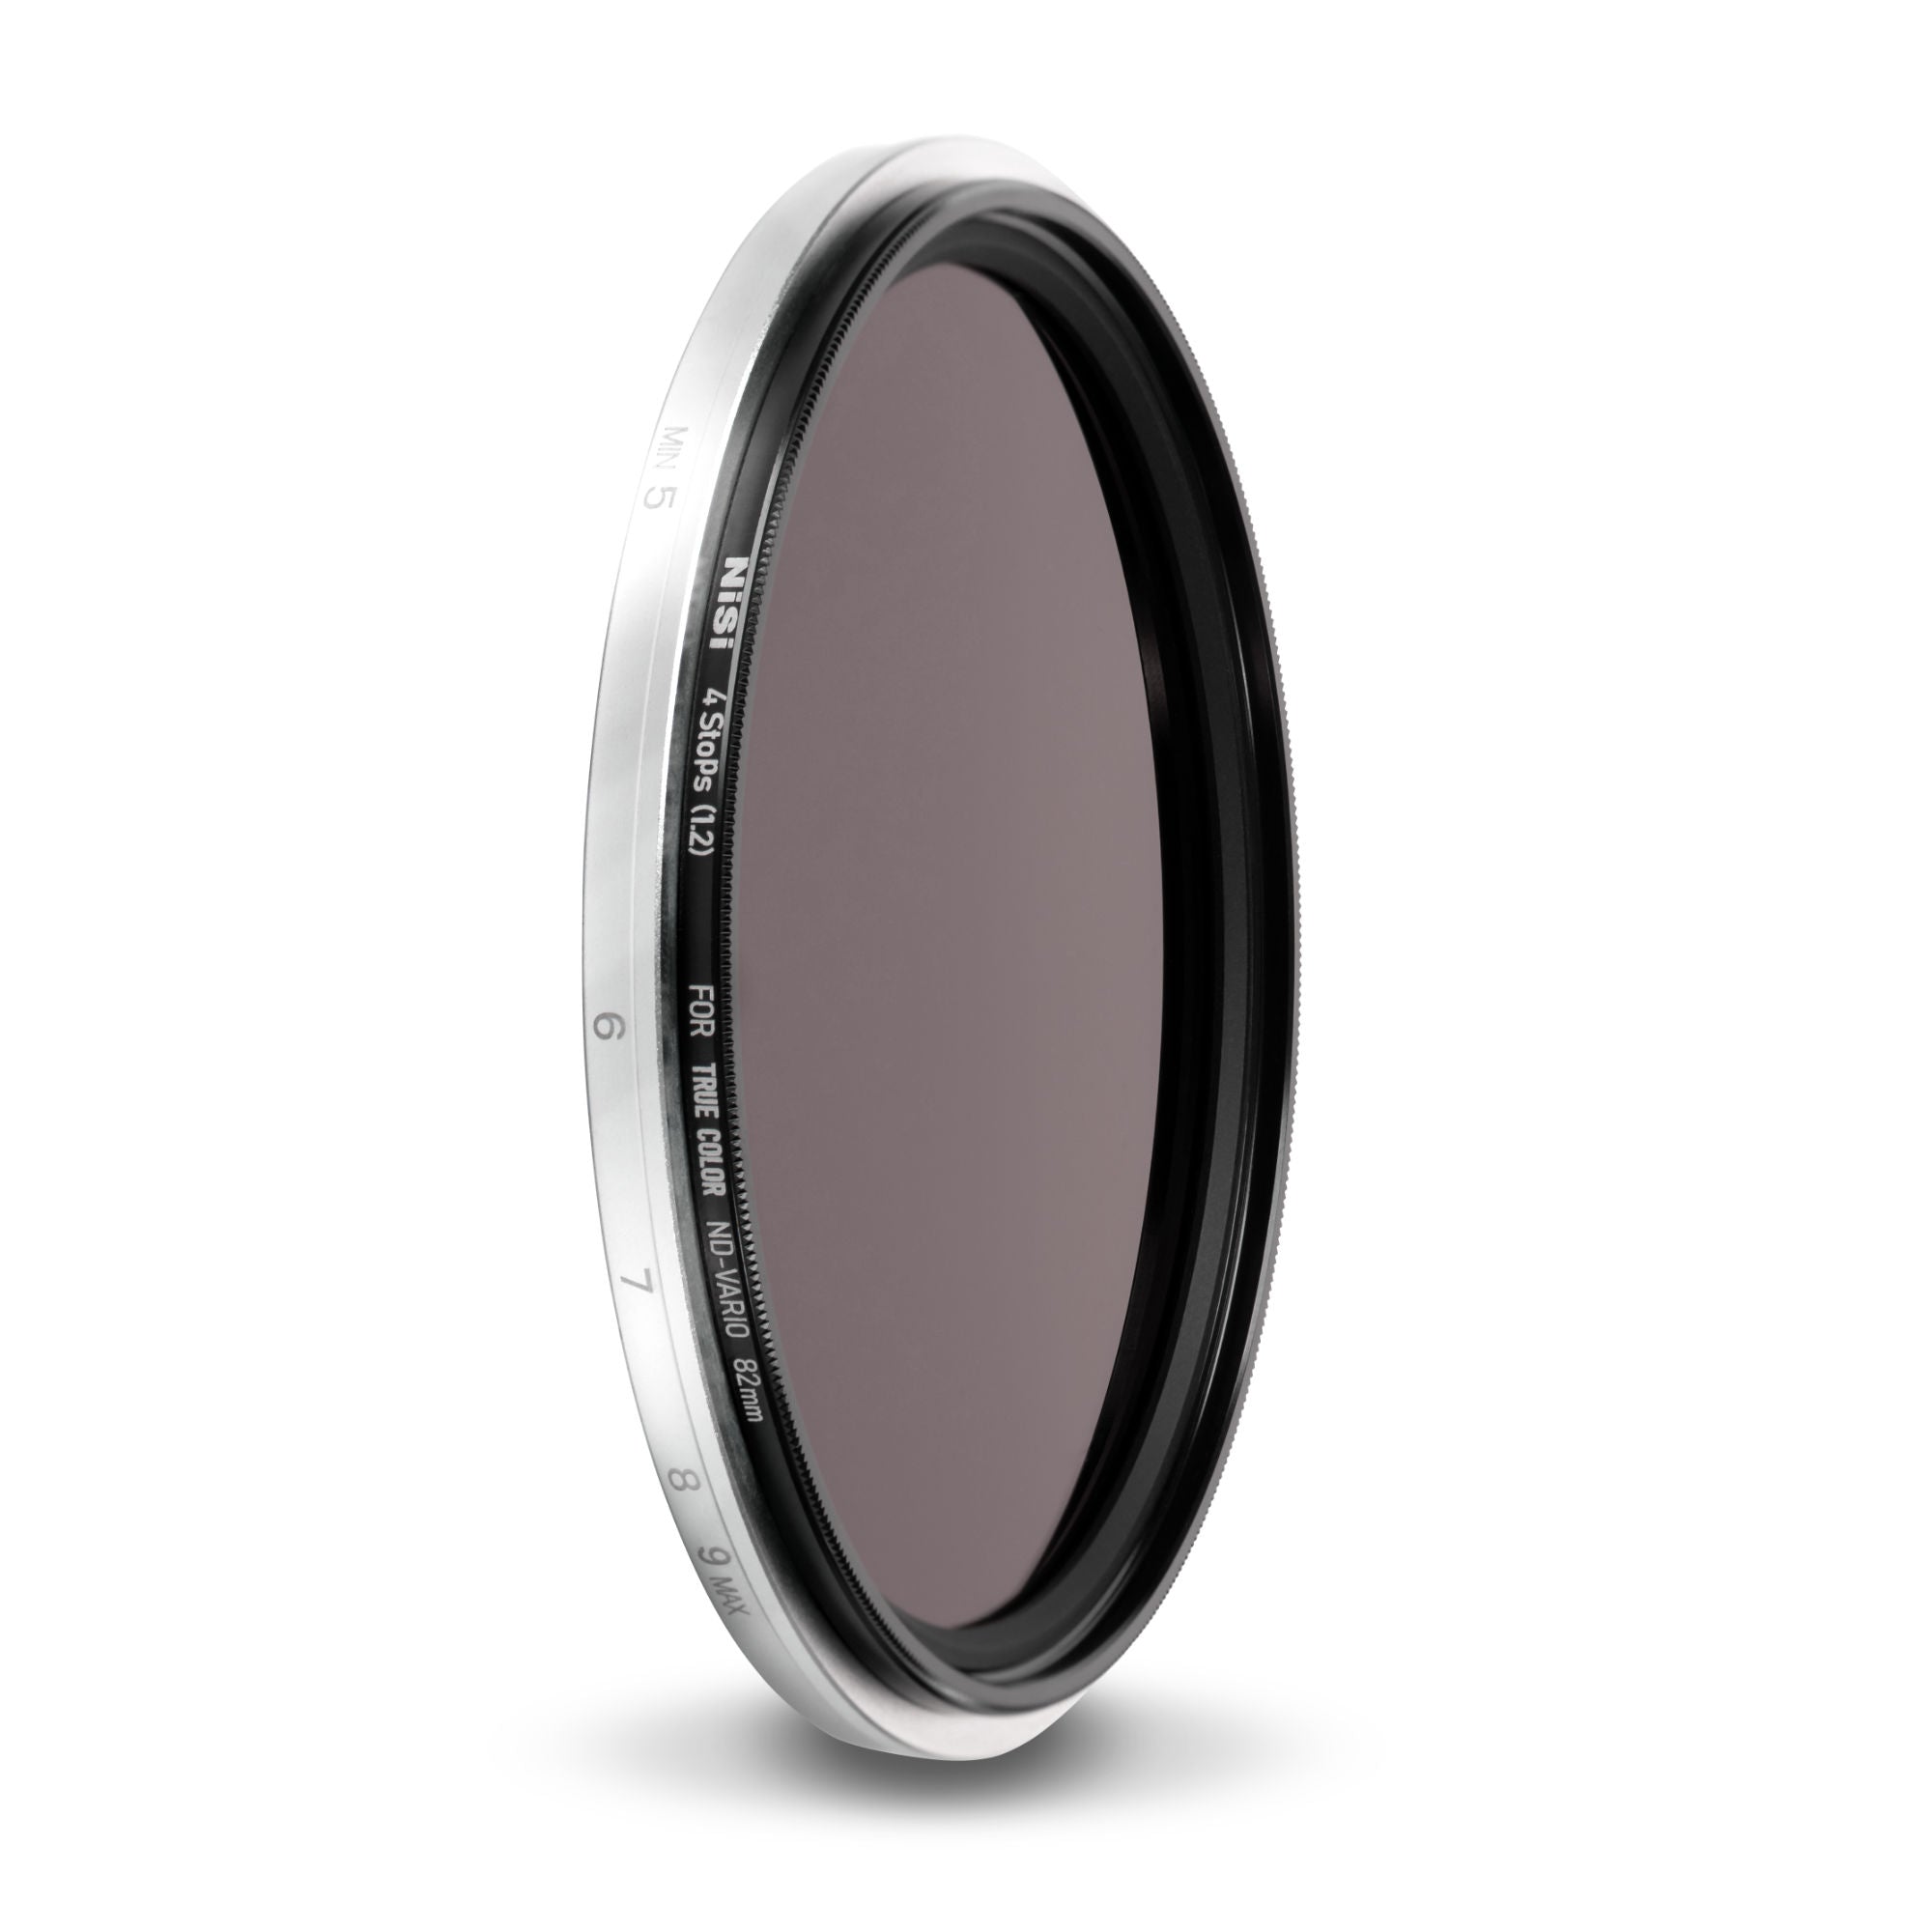 NiSi ND16 4-Stop Filter for True Color VND and Swift System